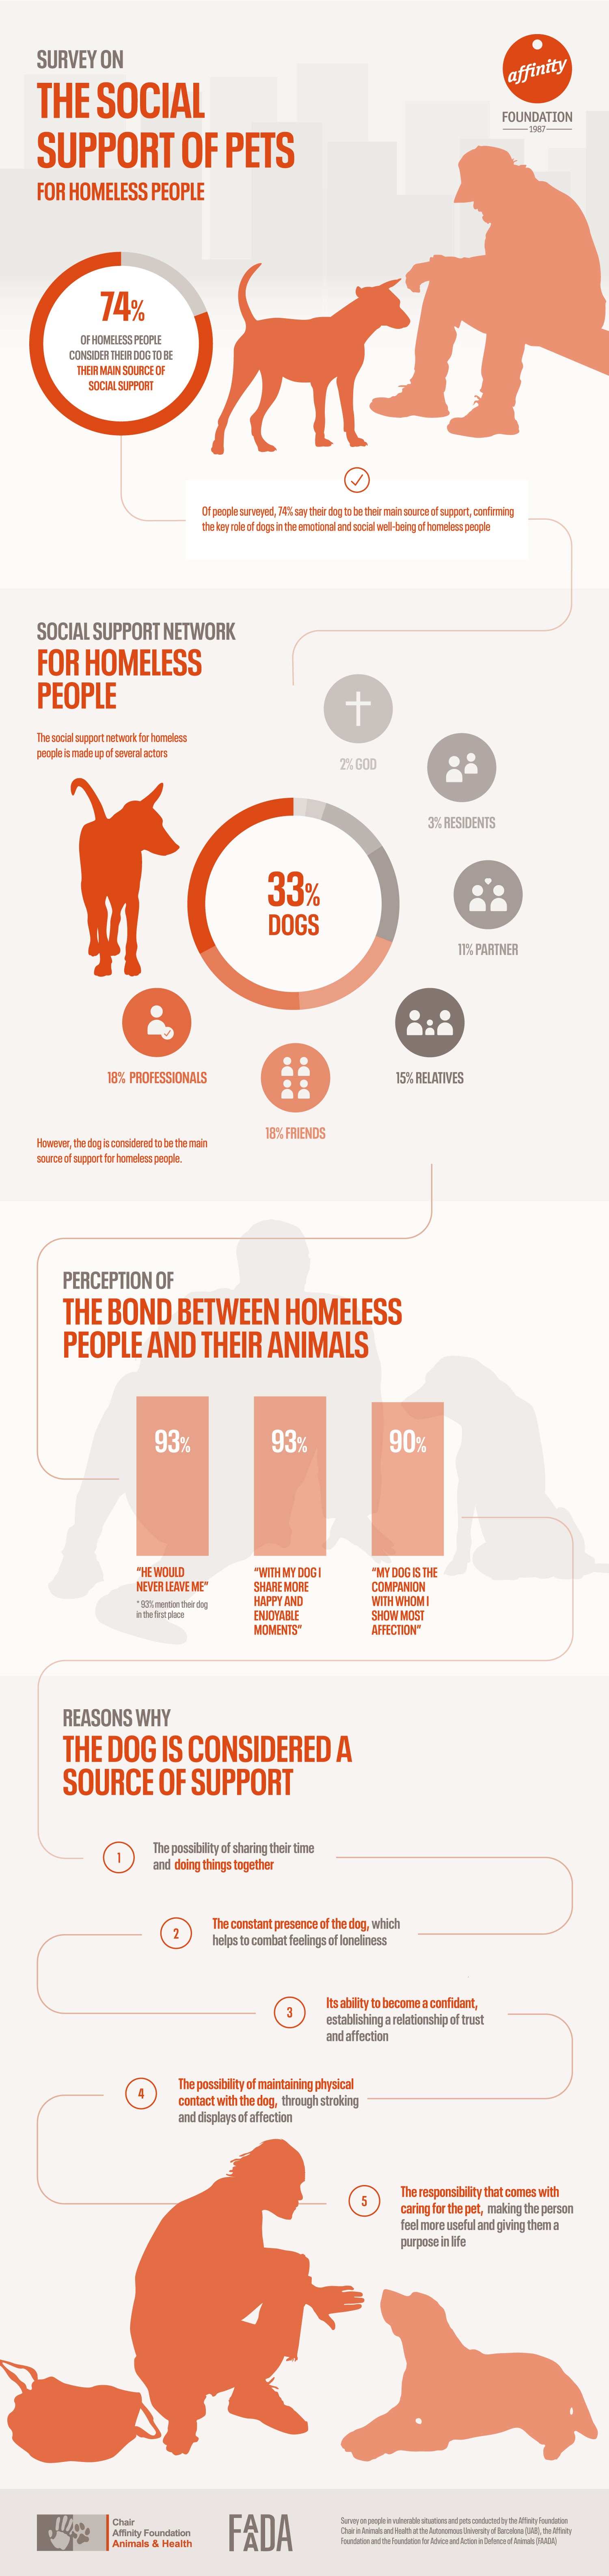 Survey on the social support of pets for homeless people